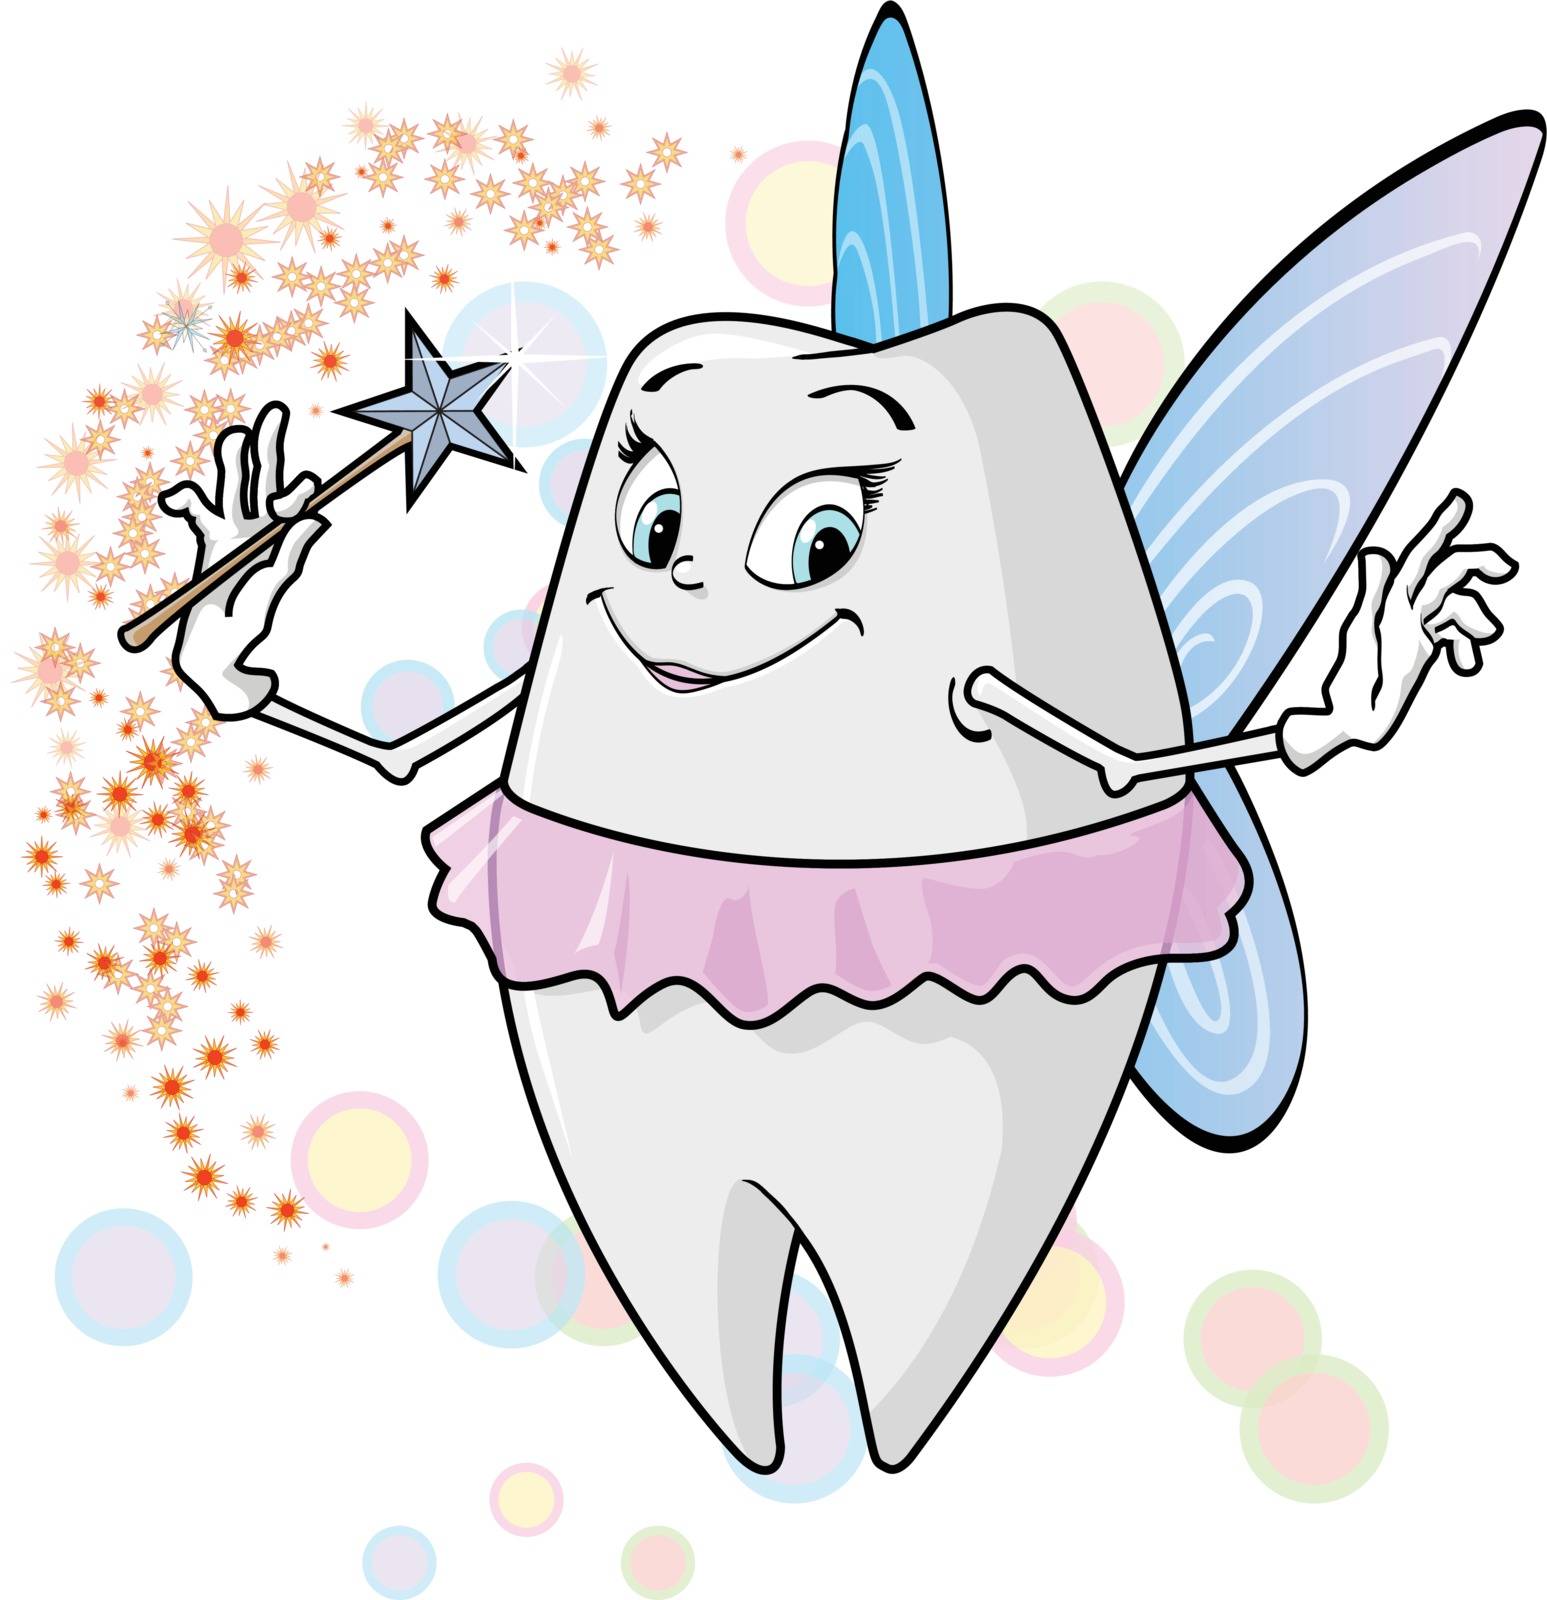 Tooth fairy by Norberthos